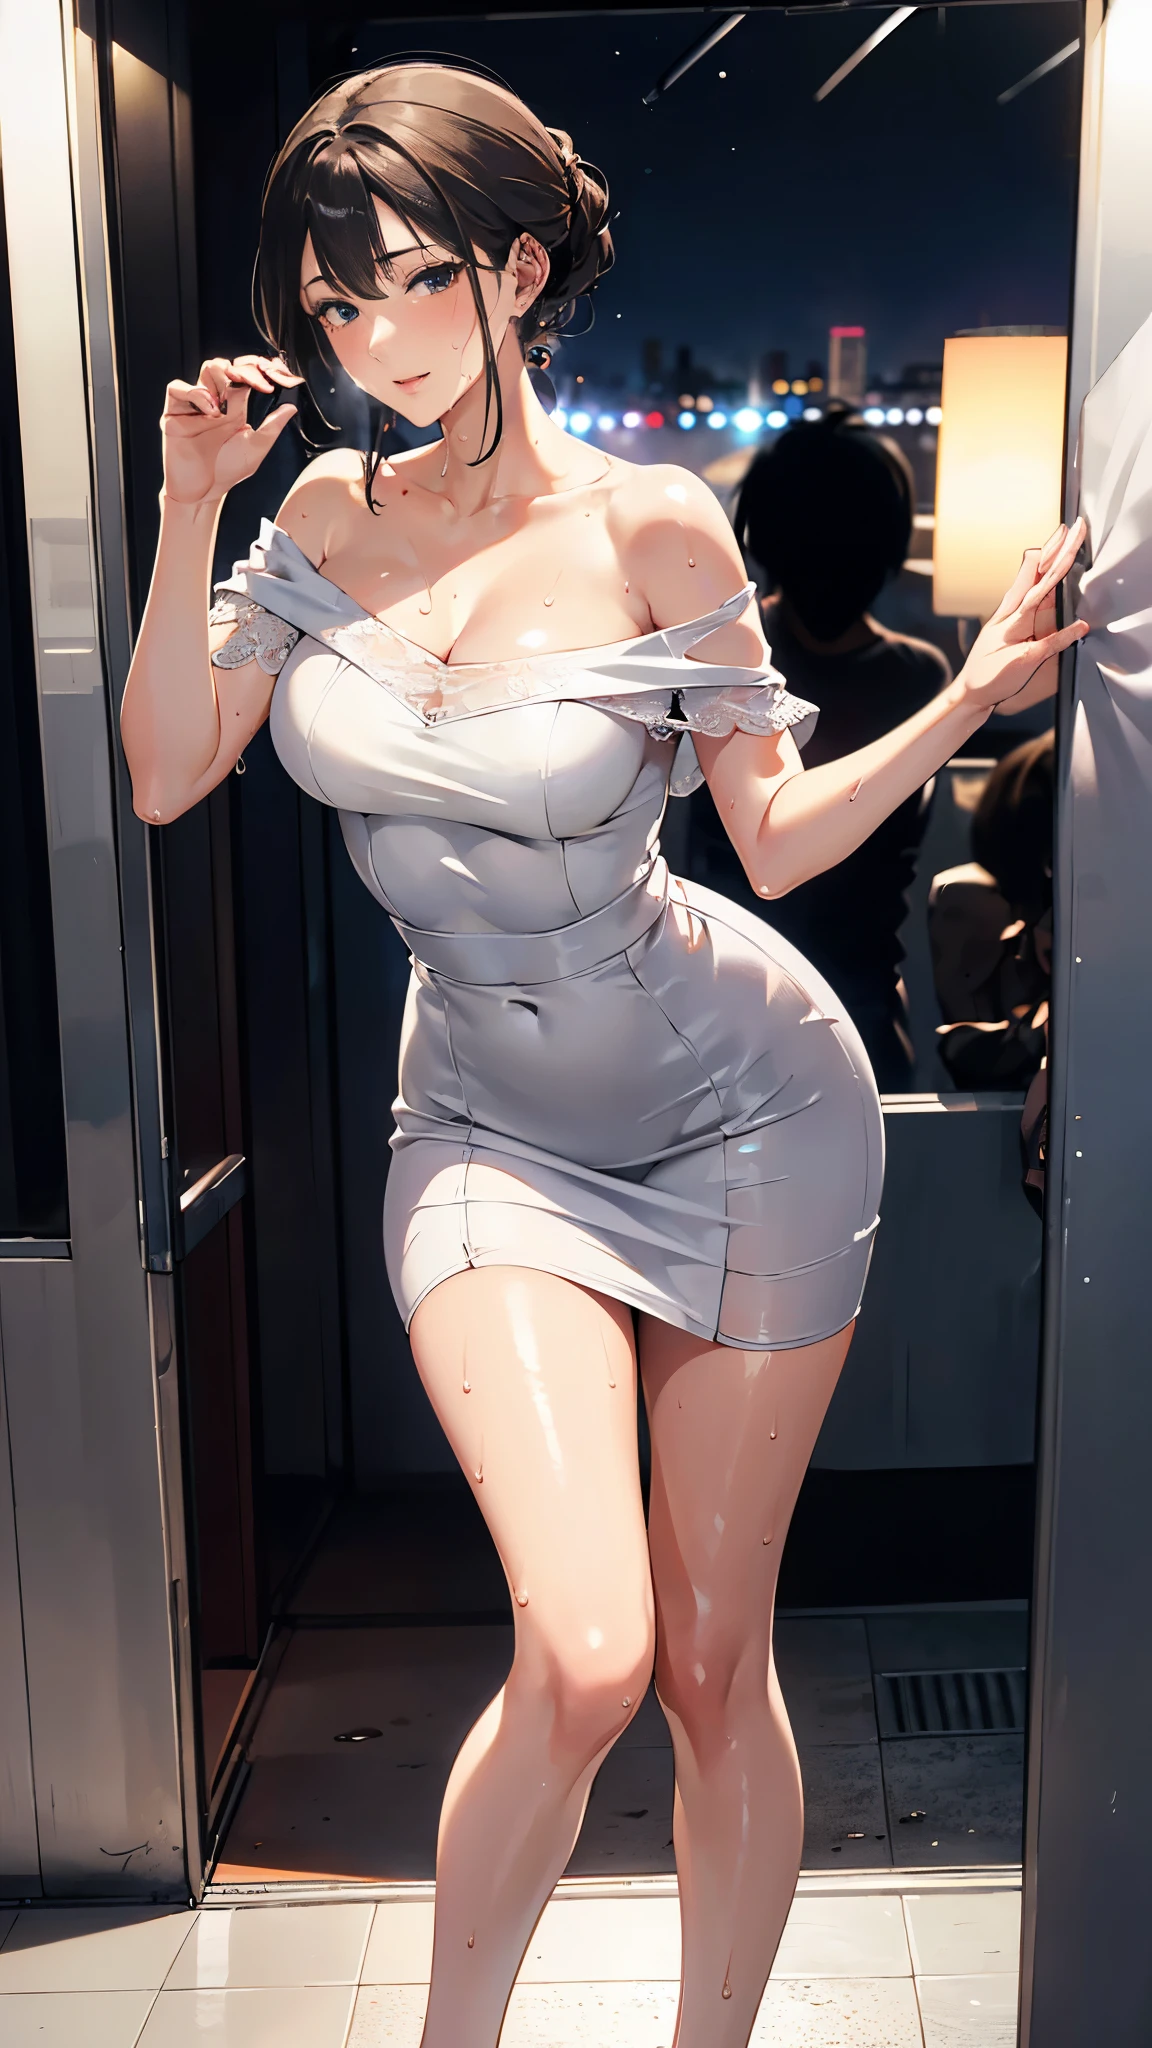 (8k, RAW photo、highest quality、masterpiece:1.2), Masterpiece, best quality, high resolution, very detailed, detailed background, 1 girl, looking at the audience, standing on the subway, inside the train, posing pose, white off-the-shoulder dress, skirt, transparent, happy, (steam),((sweat))、The temptress、invite to lewdness、(night:1.6)